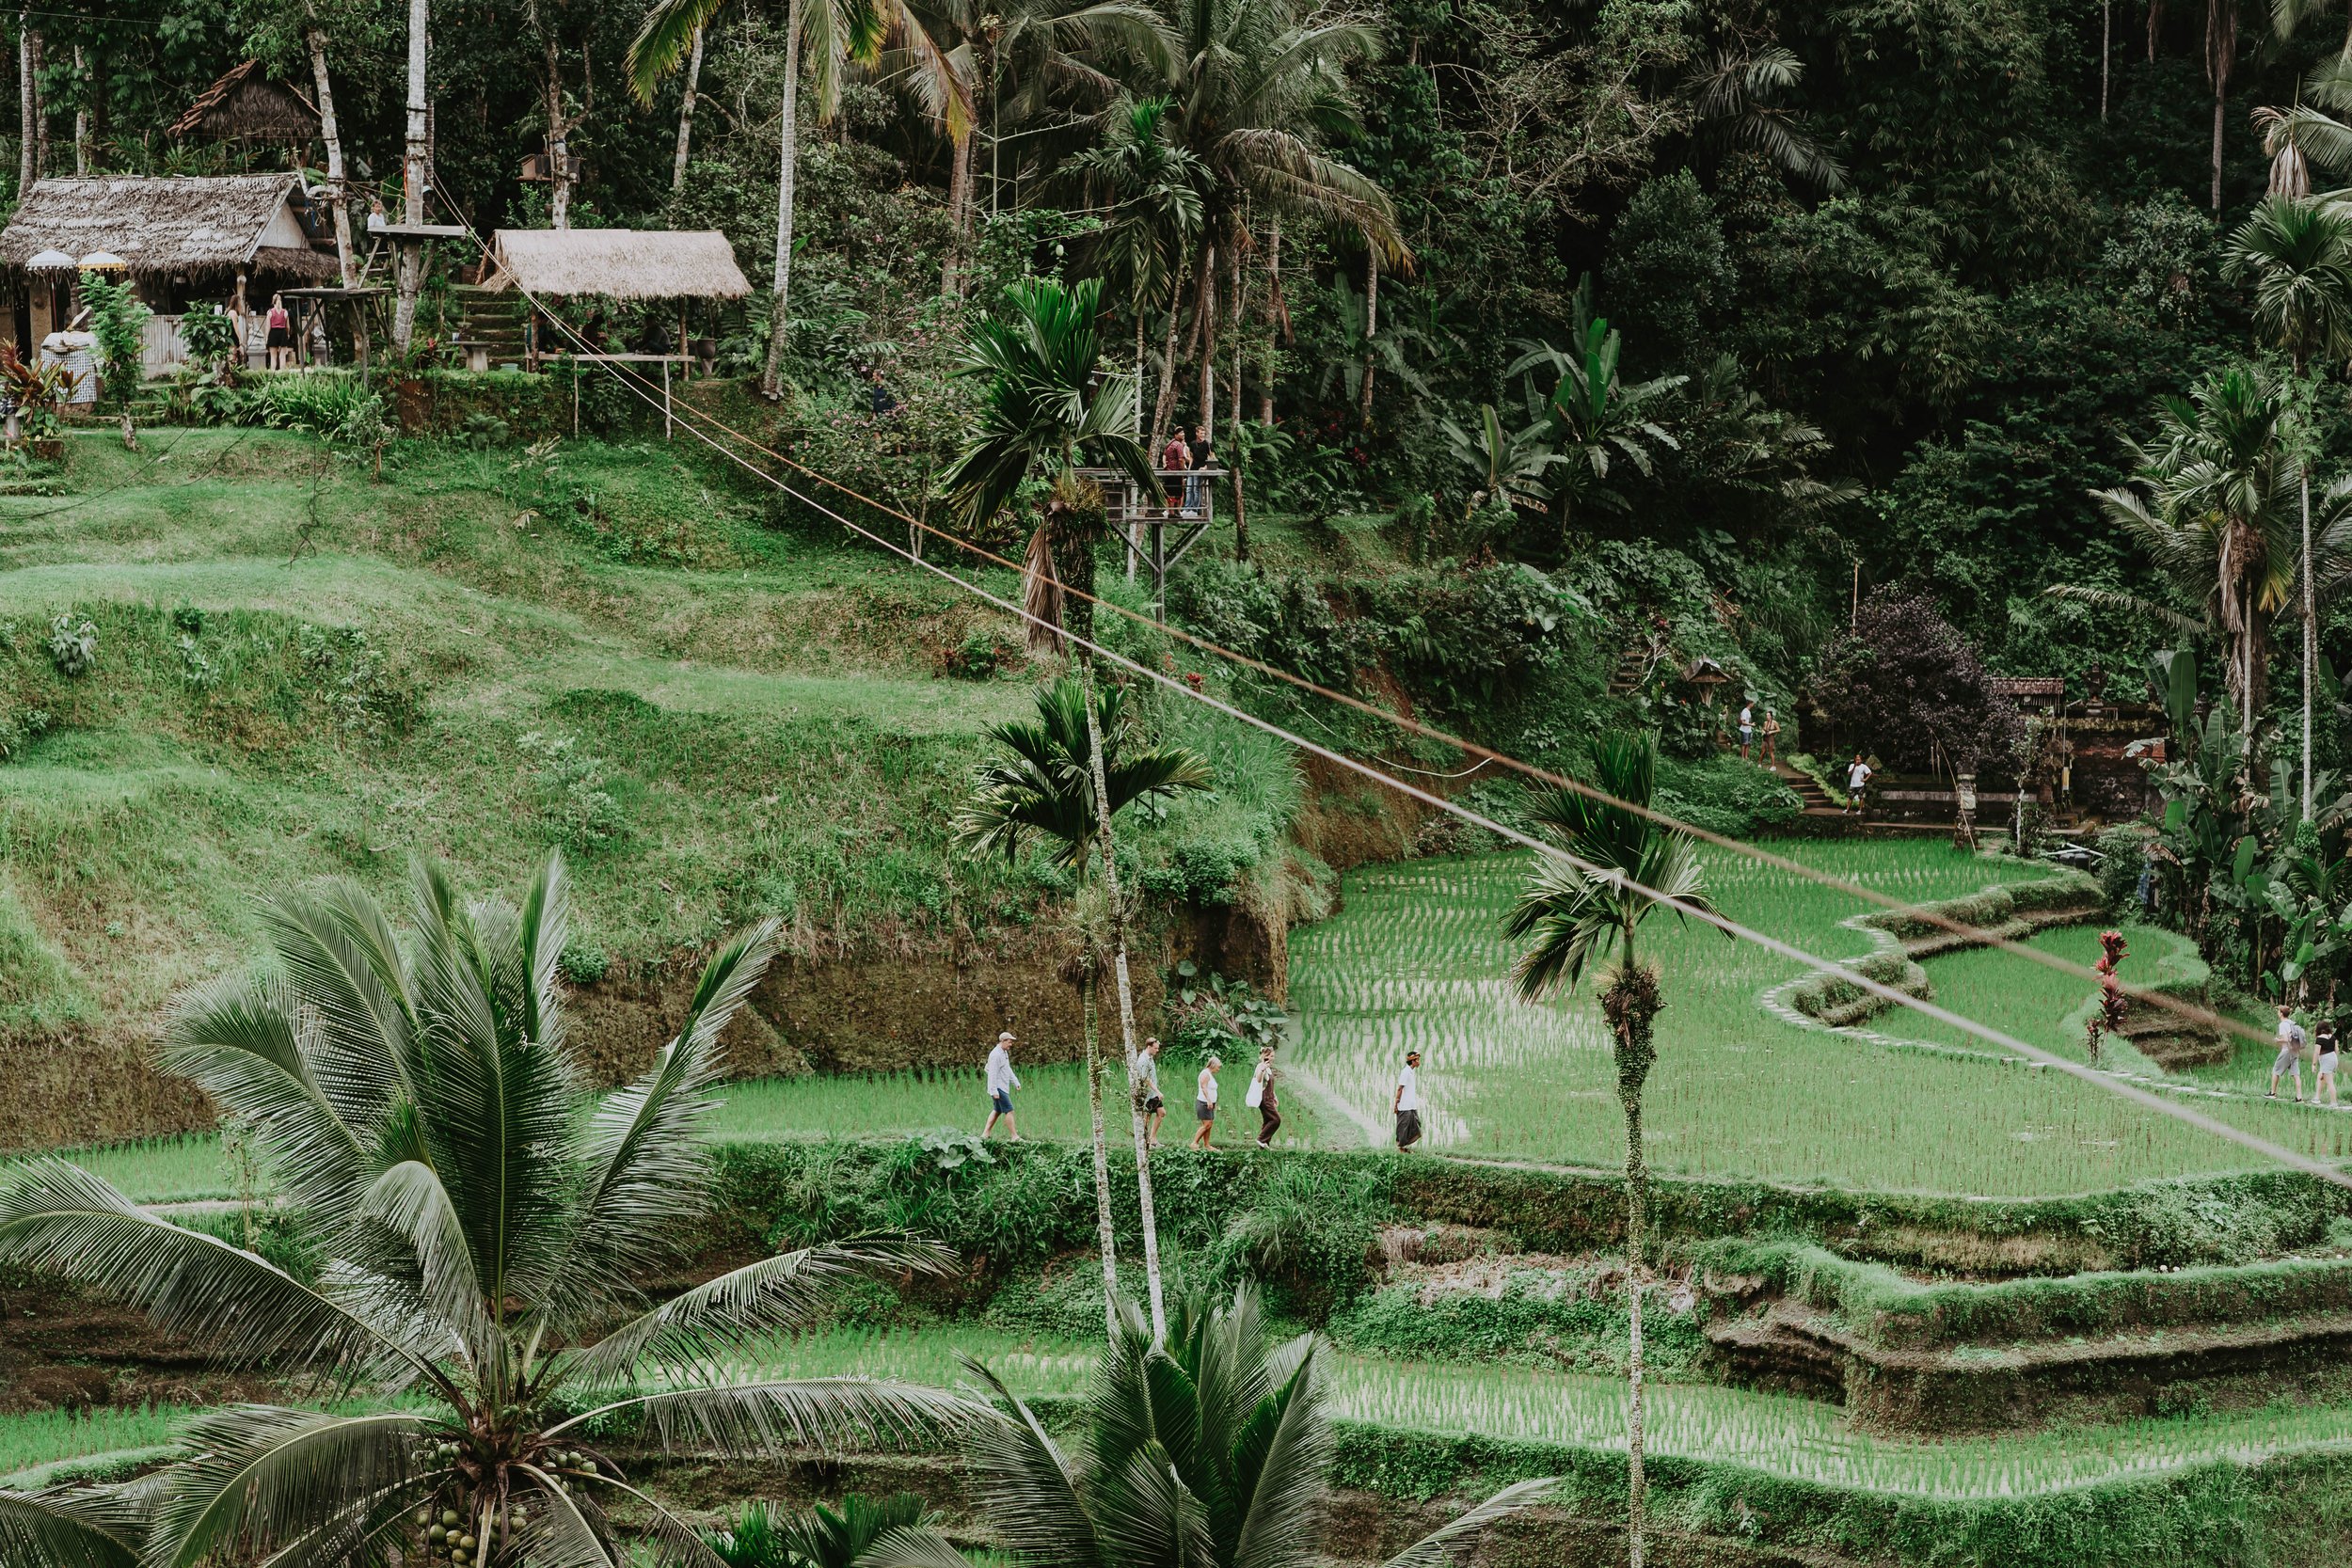 How to Spend the Best 2 Weeks in Bali